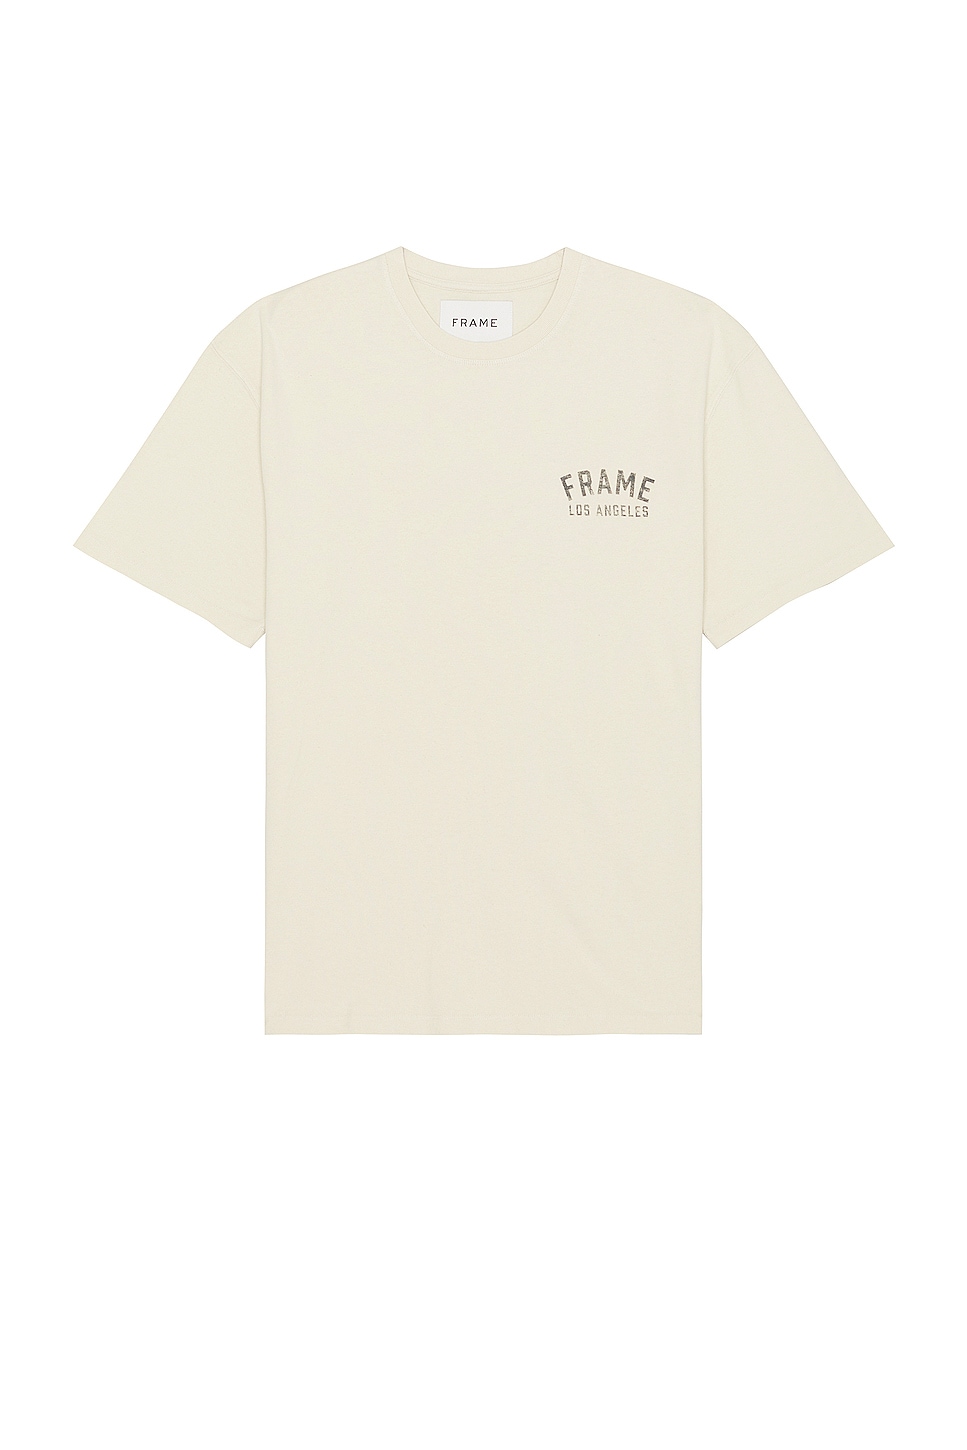 Image 1 of FRAME Vintage Print Short Sleeve Tee in Washed Cream